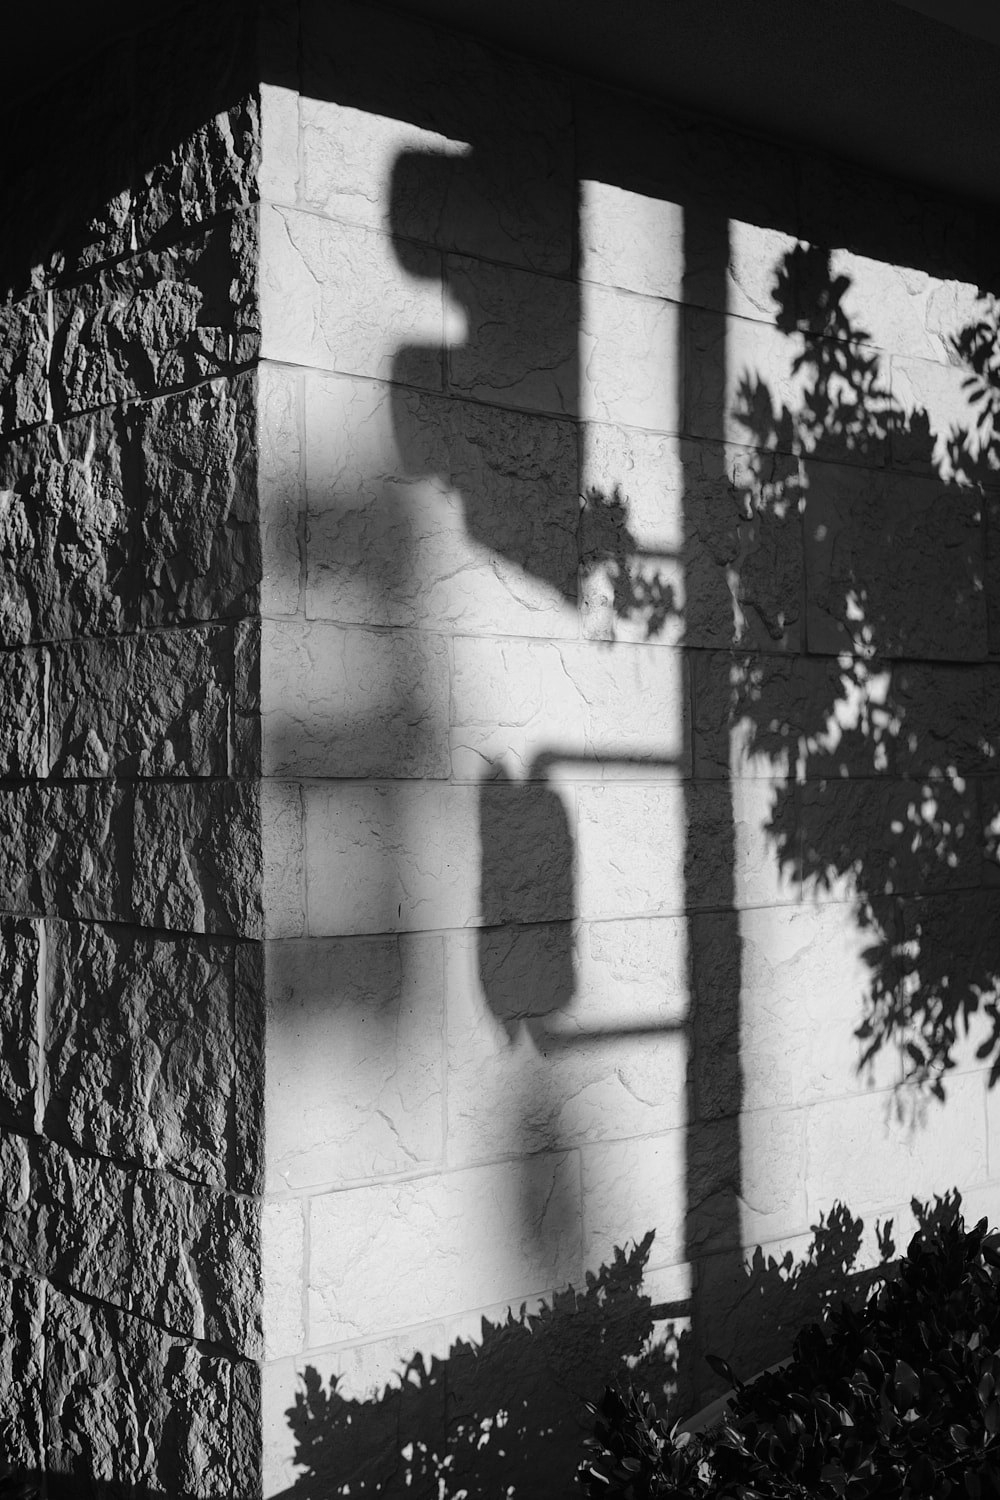 Black and white portrait photo of the shadow of a street light hitting the side of a apartment building.